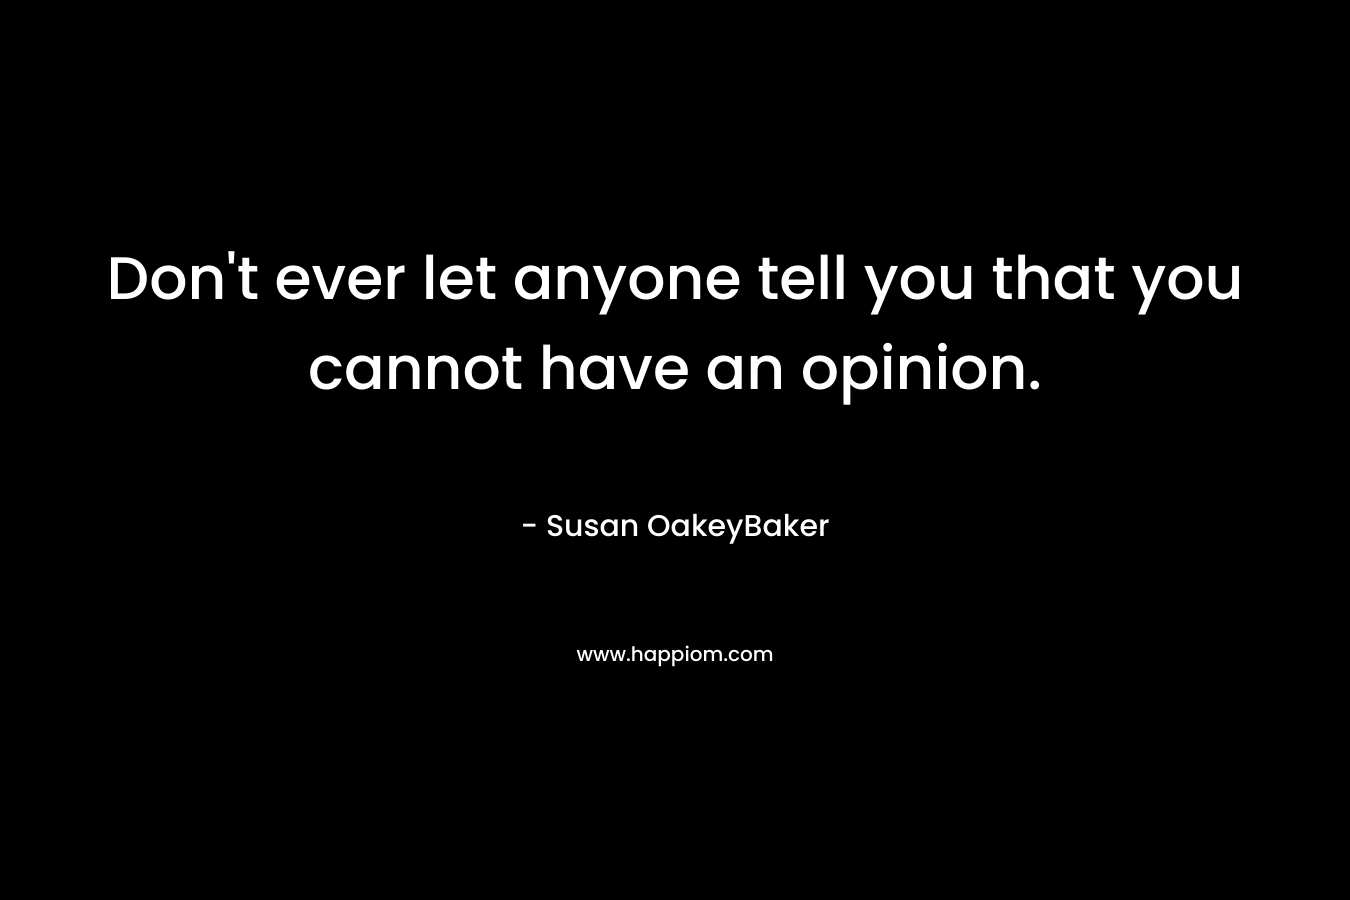 Don't ever let anyone tell you that you cannot have an opinion.